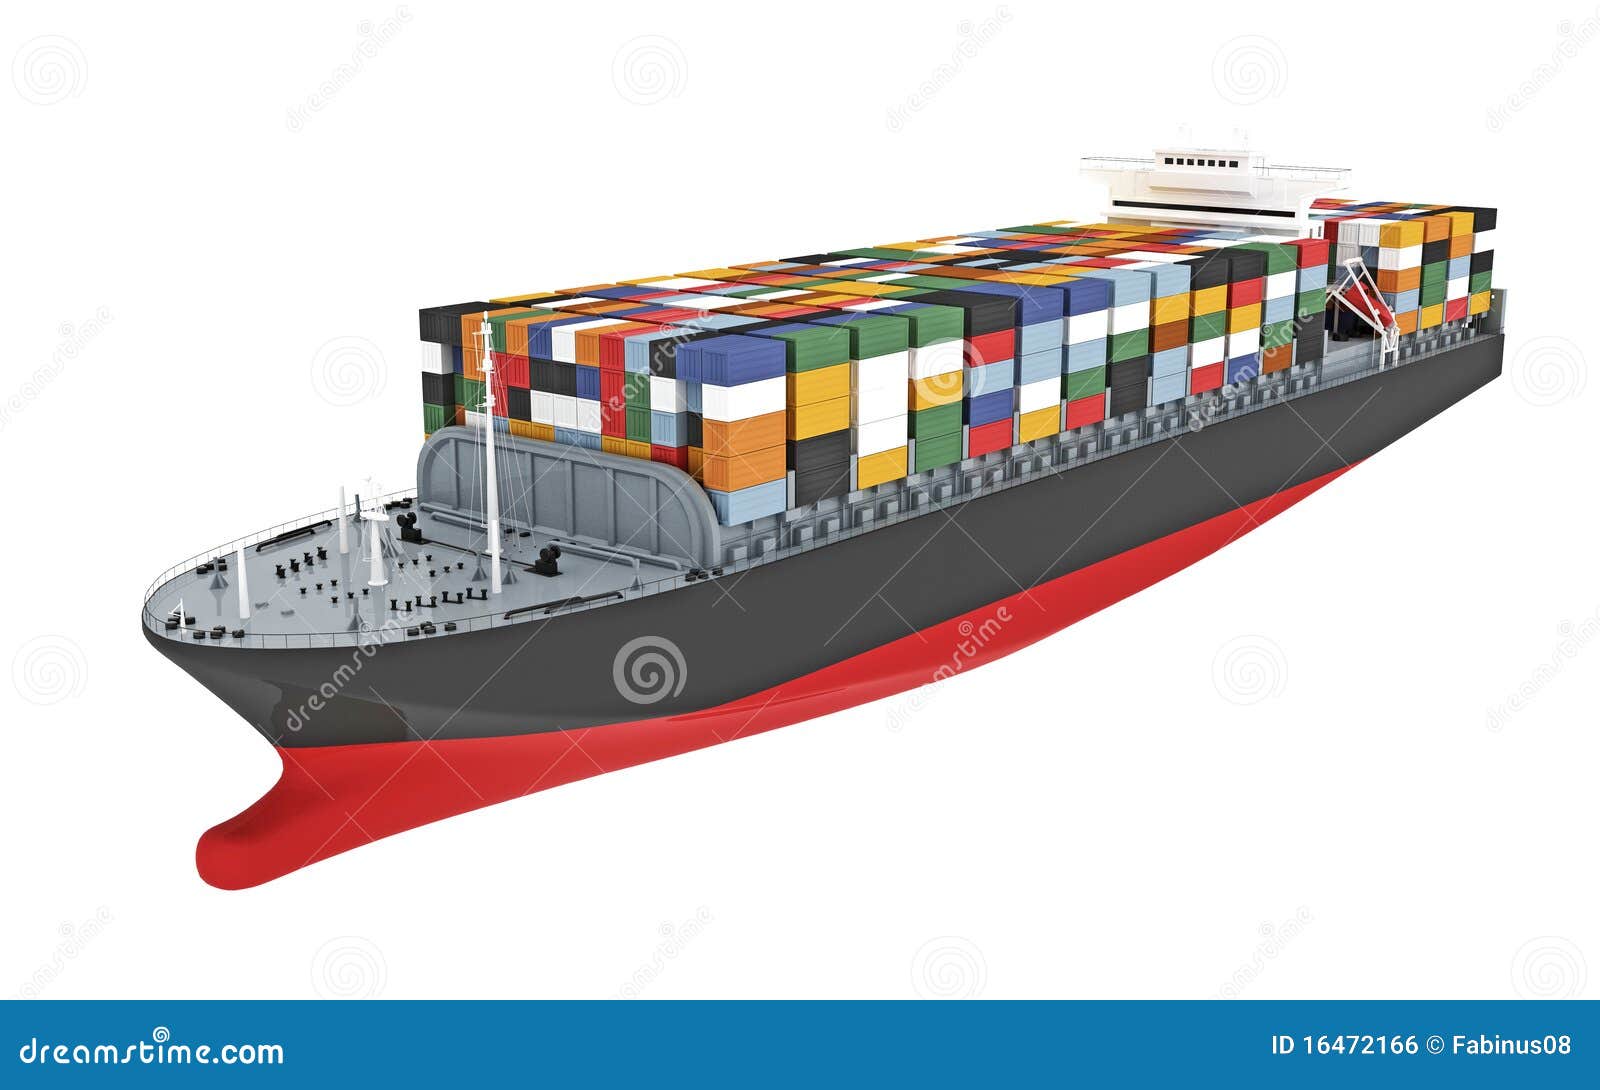 clipart container vessel - photo #7